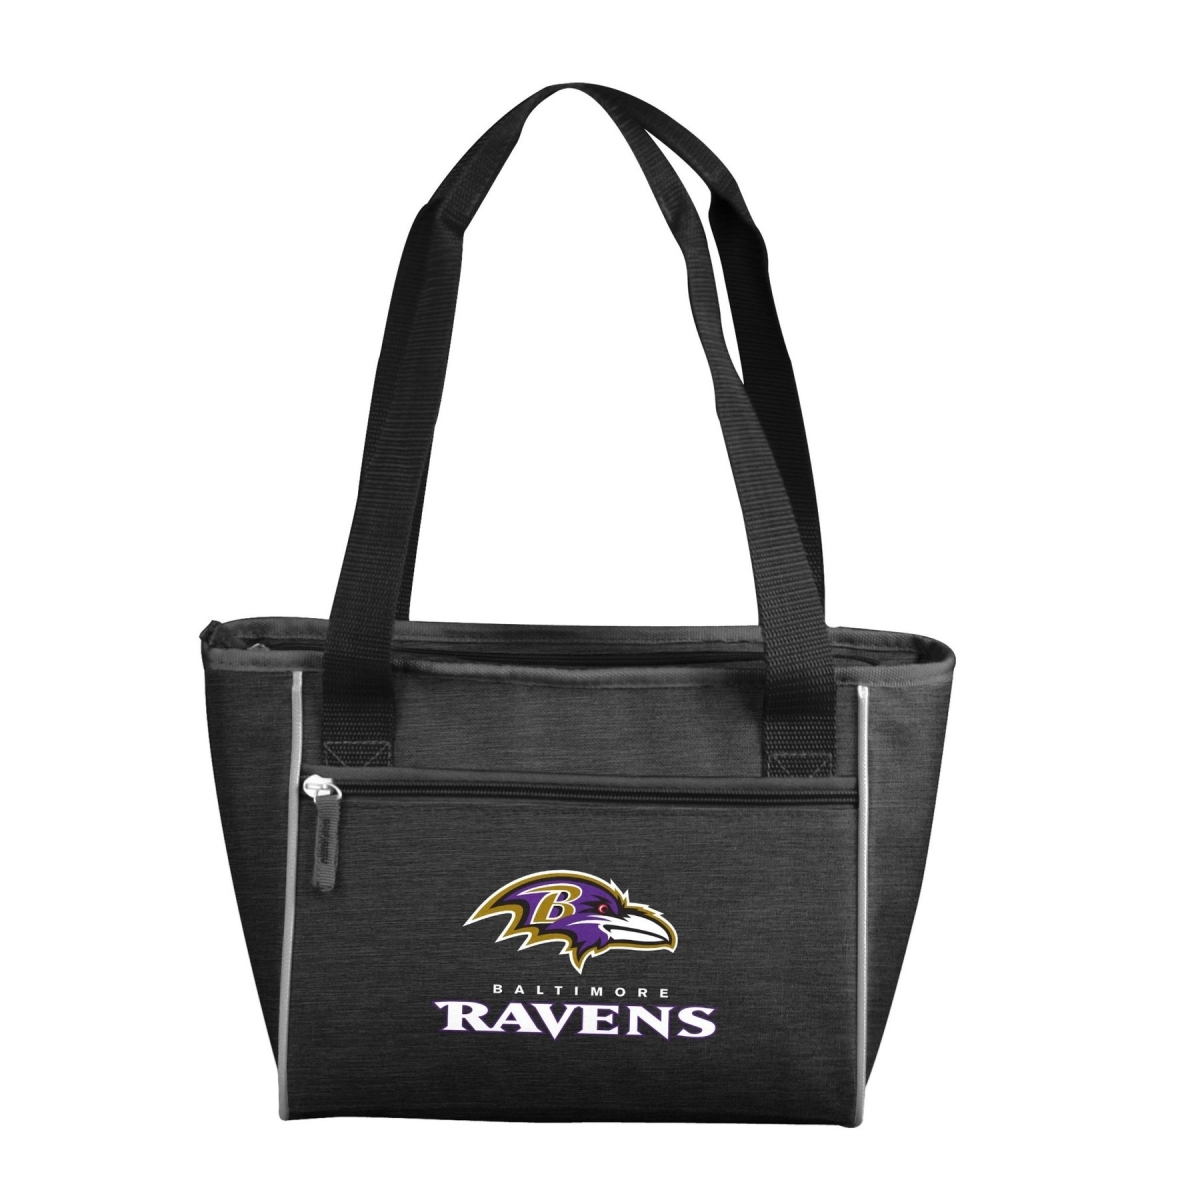 Picture of Logo Chair 603-83-CR1 NFL Baltimore Ravens Crosshatch Cooler Tote Bag Holds for 16 Cans